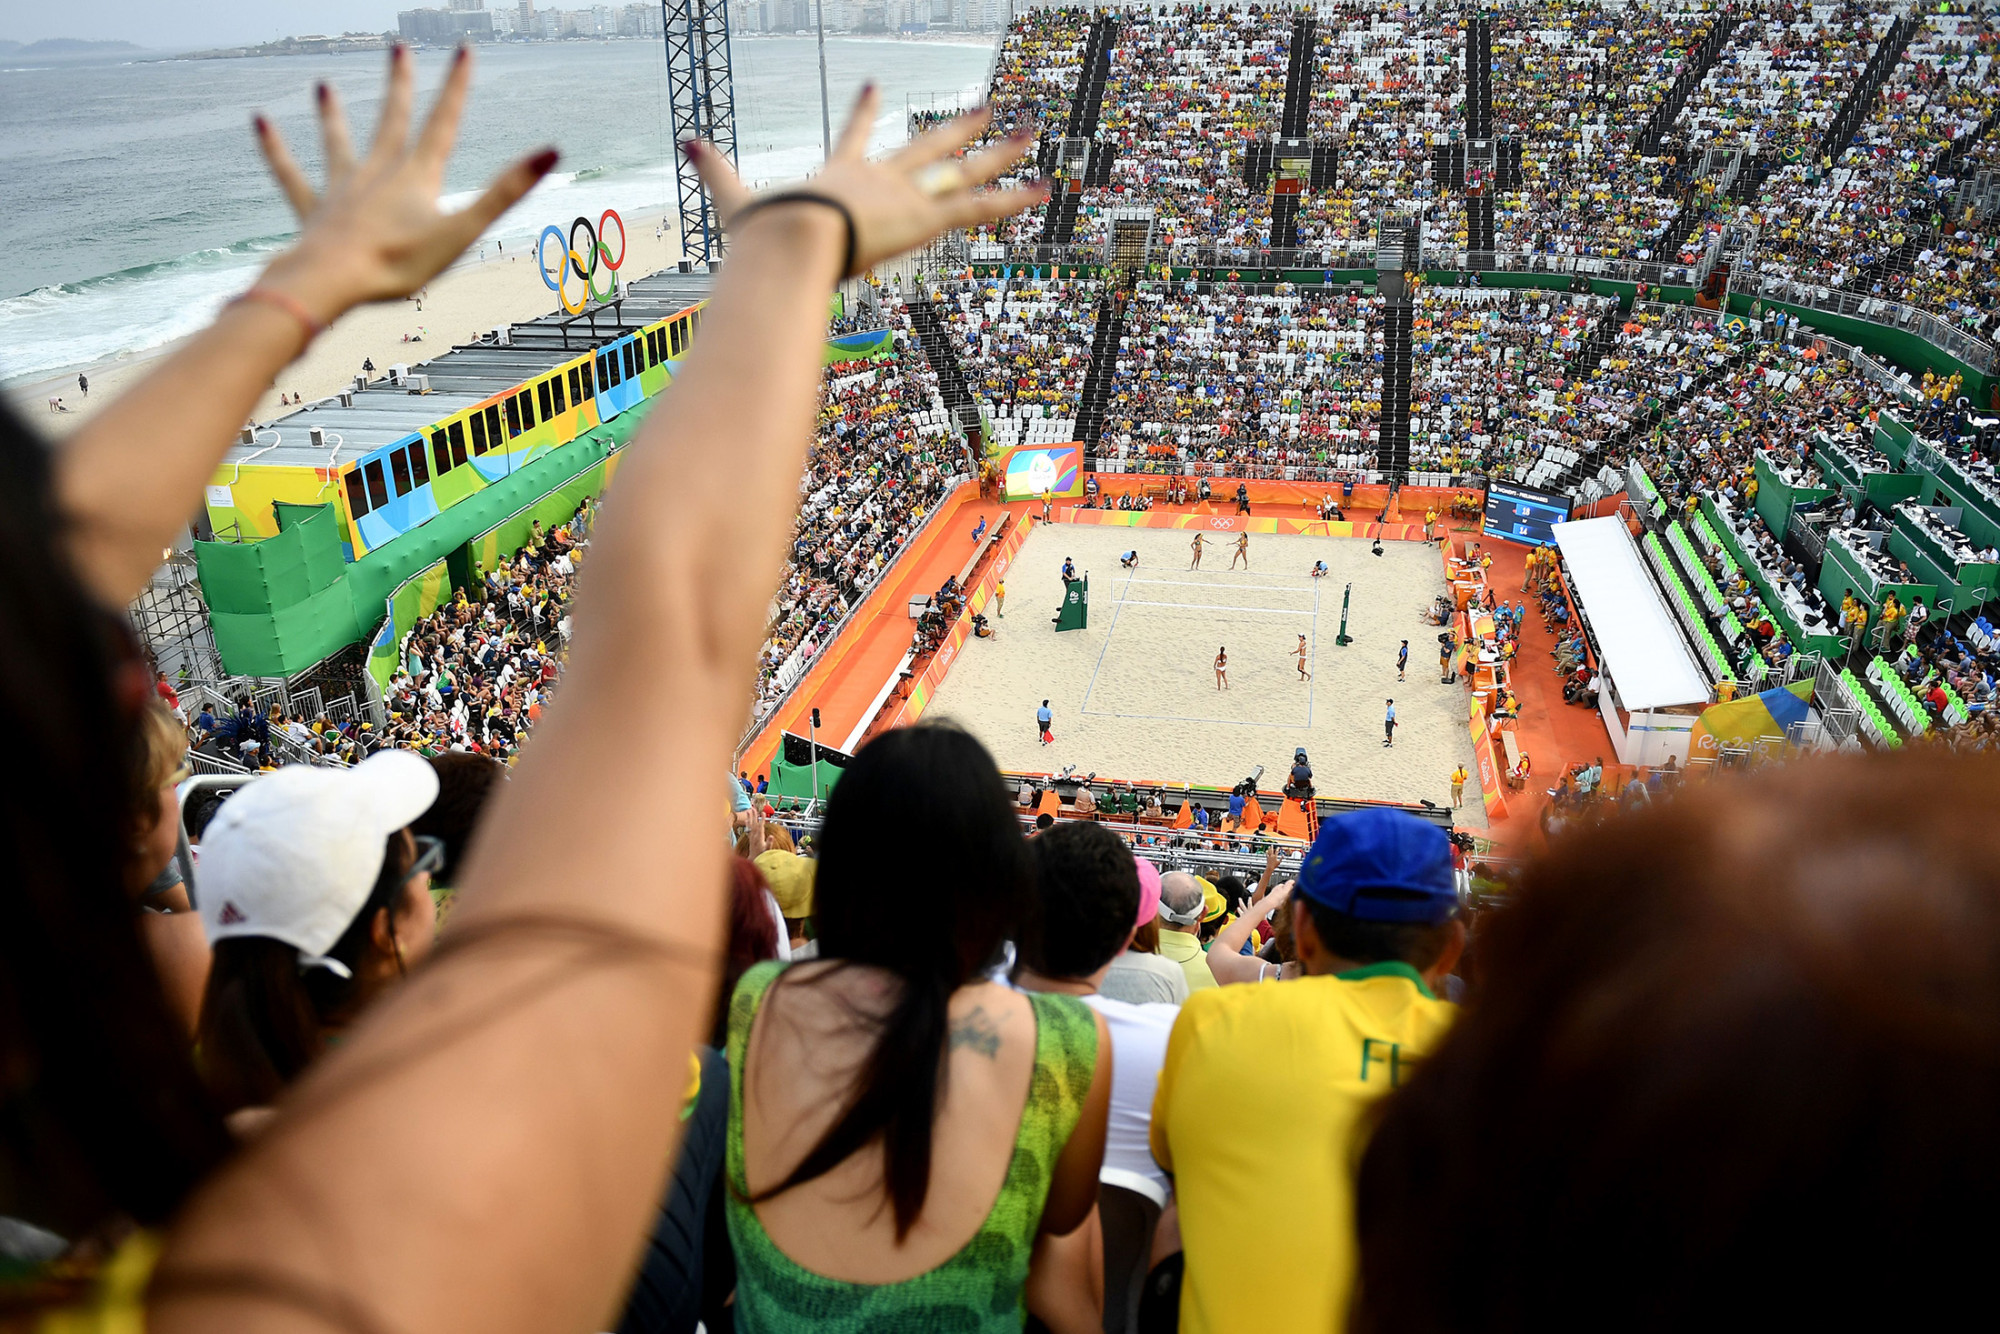 Rio 2016 Olympics: Another Reason to Watch Brazil's Rise - Rio+20